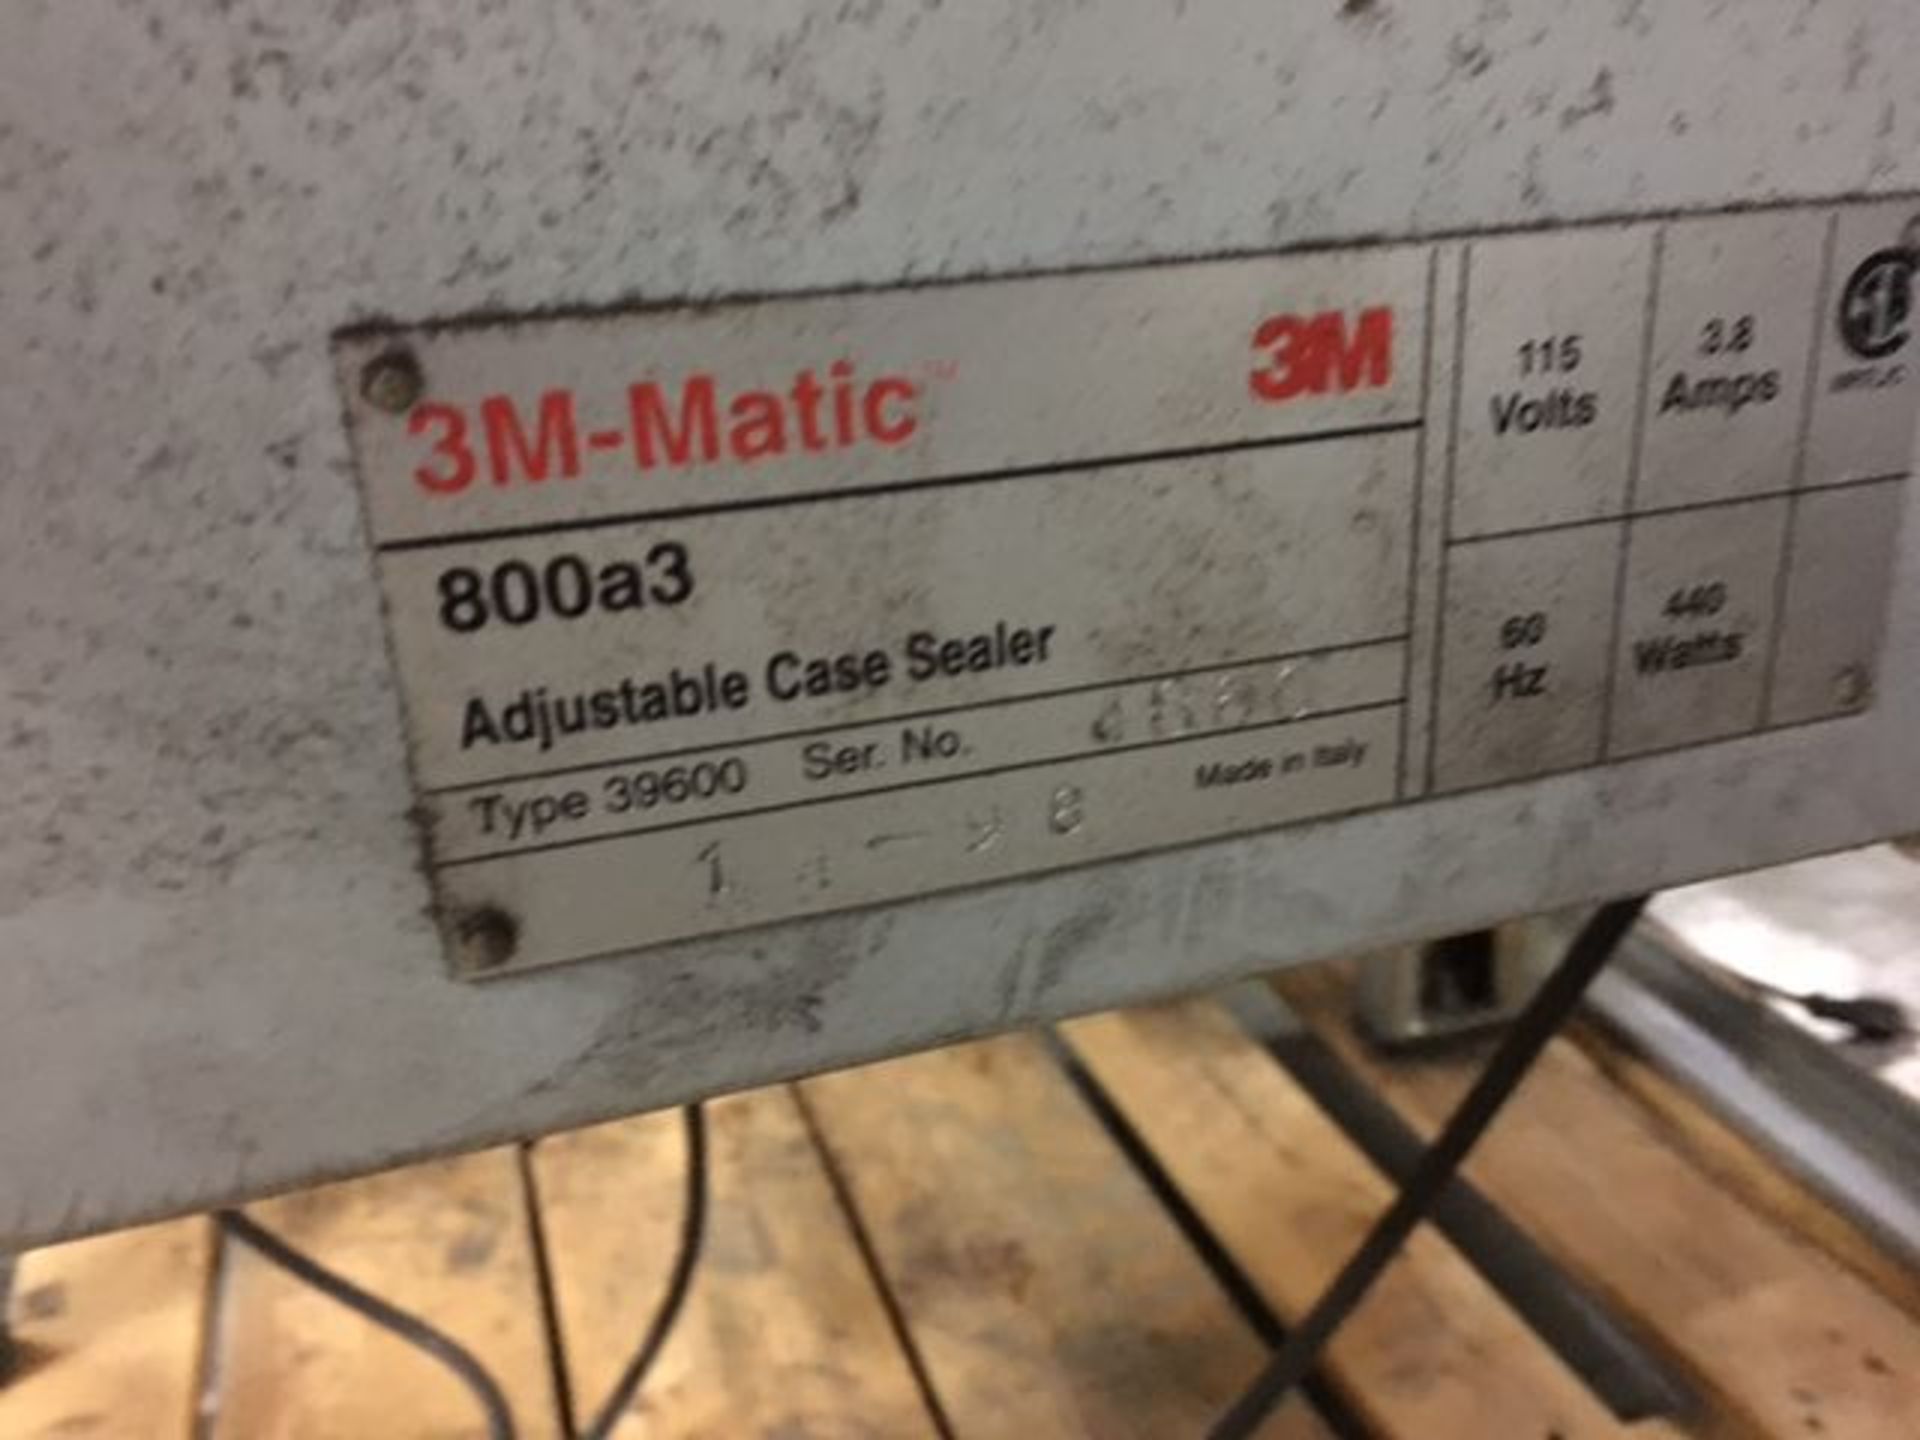 3M-MATIC TYPE 39600 800A3 ADJUSTABLE CASE SEALER; S/N 4860 - LOCATED AT 6600 STOCKTON ROAD, - Image 3 of 4